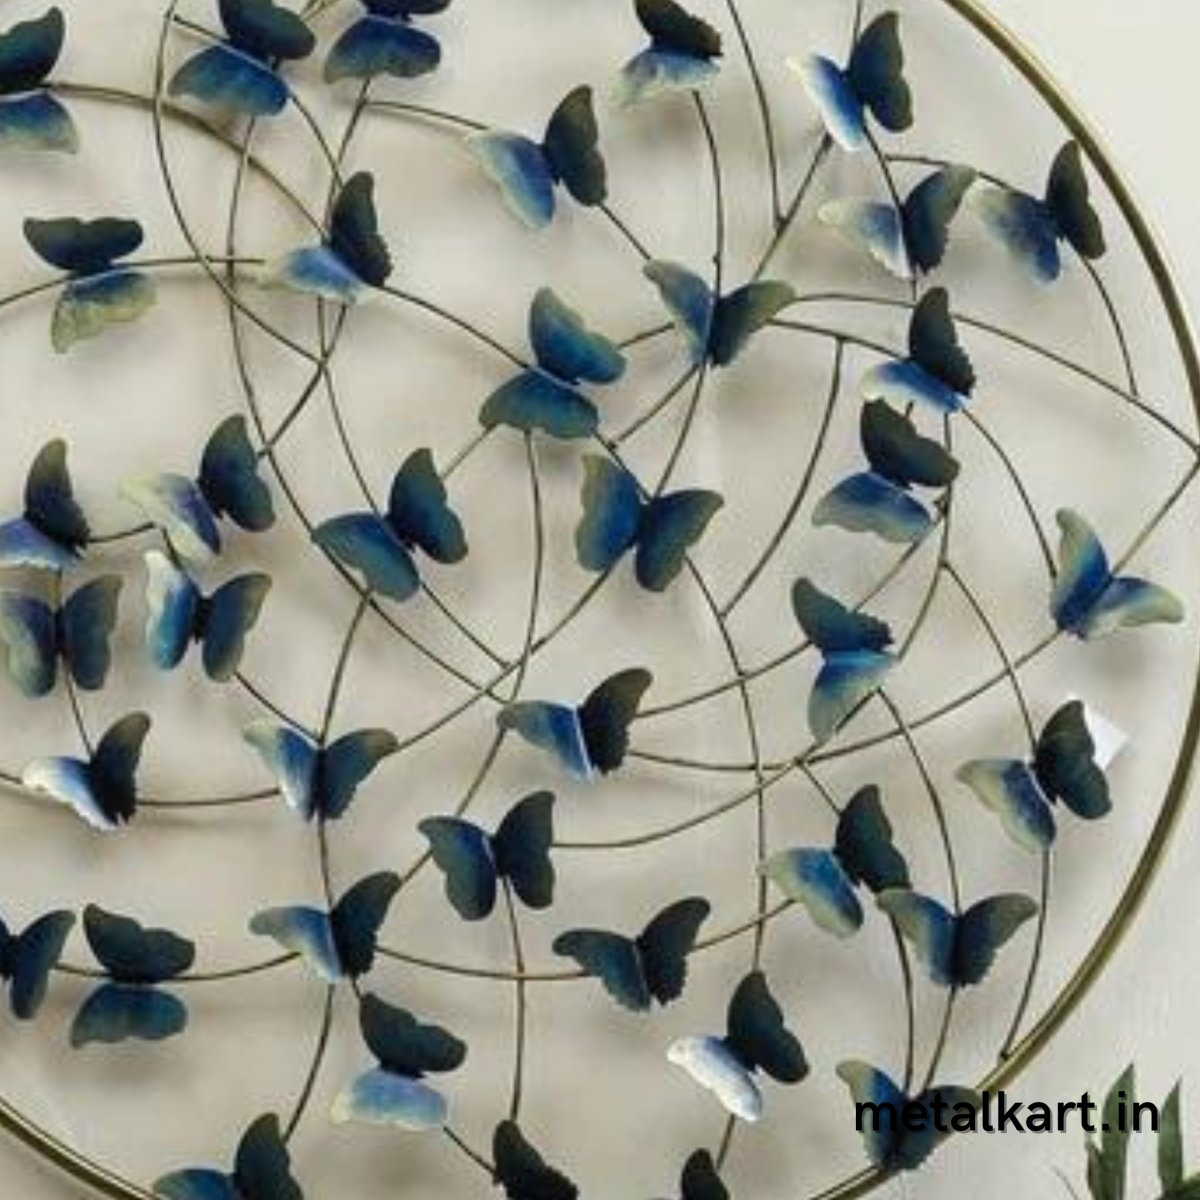 Circle of Butterflies (36 Inches)